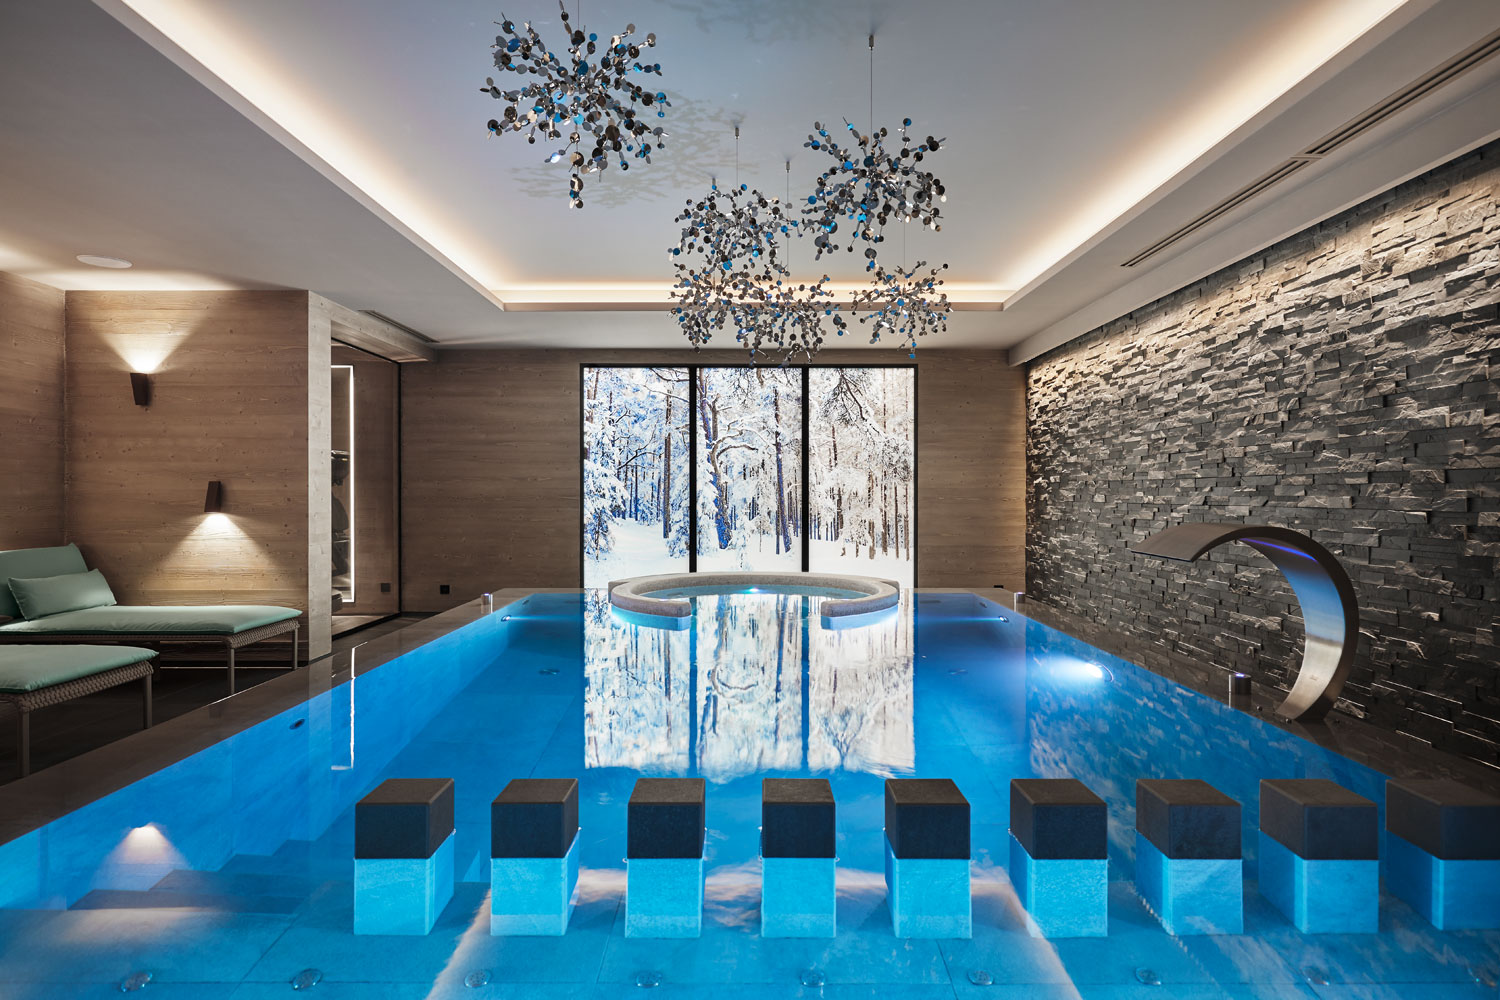 Indoor swimming pool of the chalet kirana in Meribel, private luxury chalet, interior design, decoration, charlotte perriand, modernity, natural materials, intimate belvedere, studio jean-philippe nuel